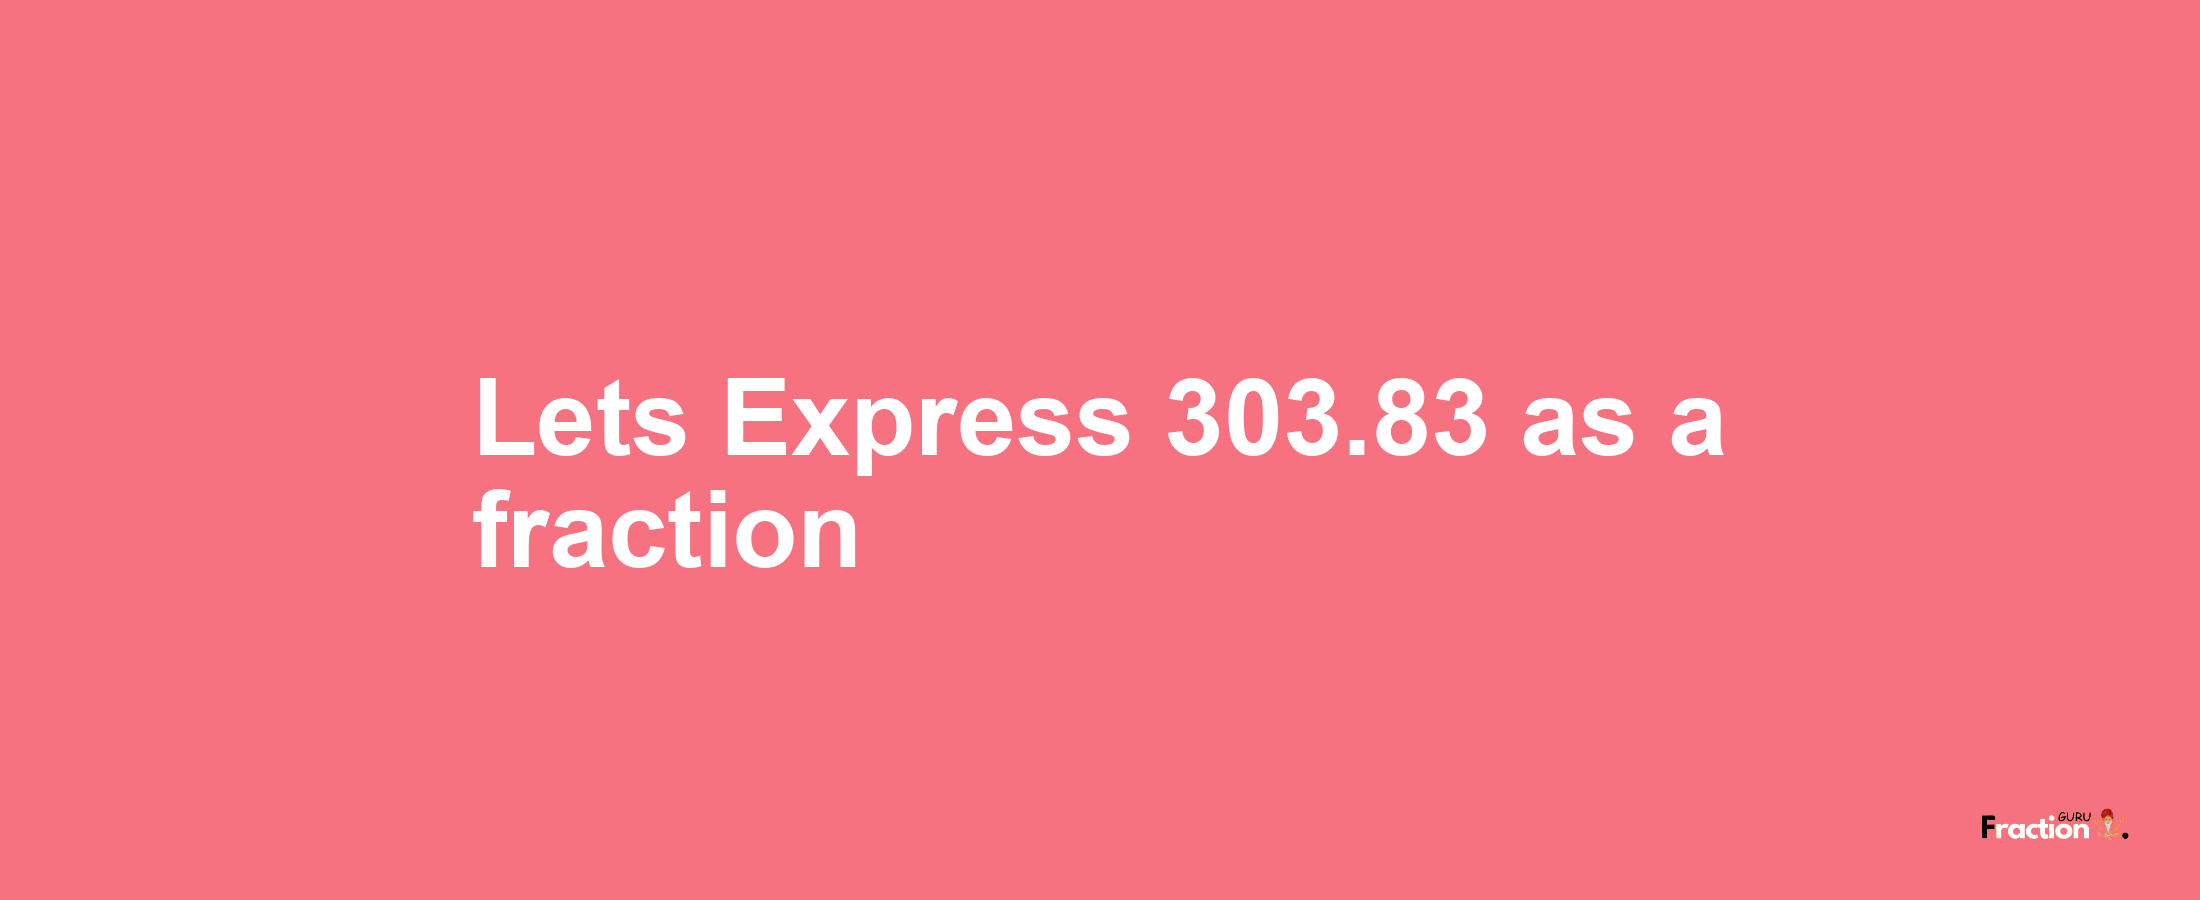 Lets Express 303.83 as afraction